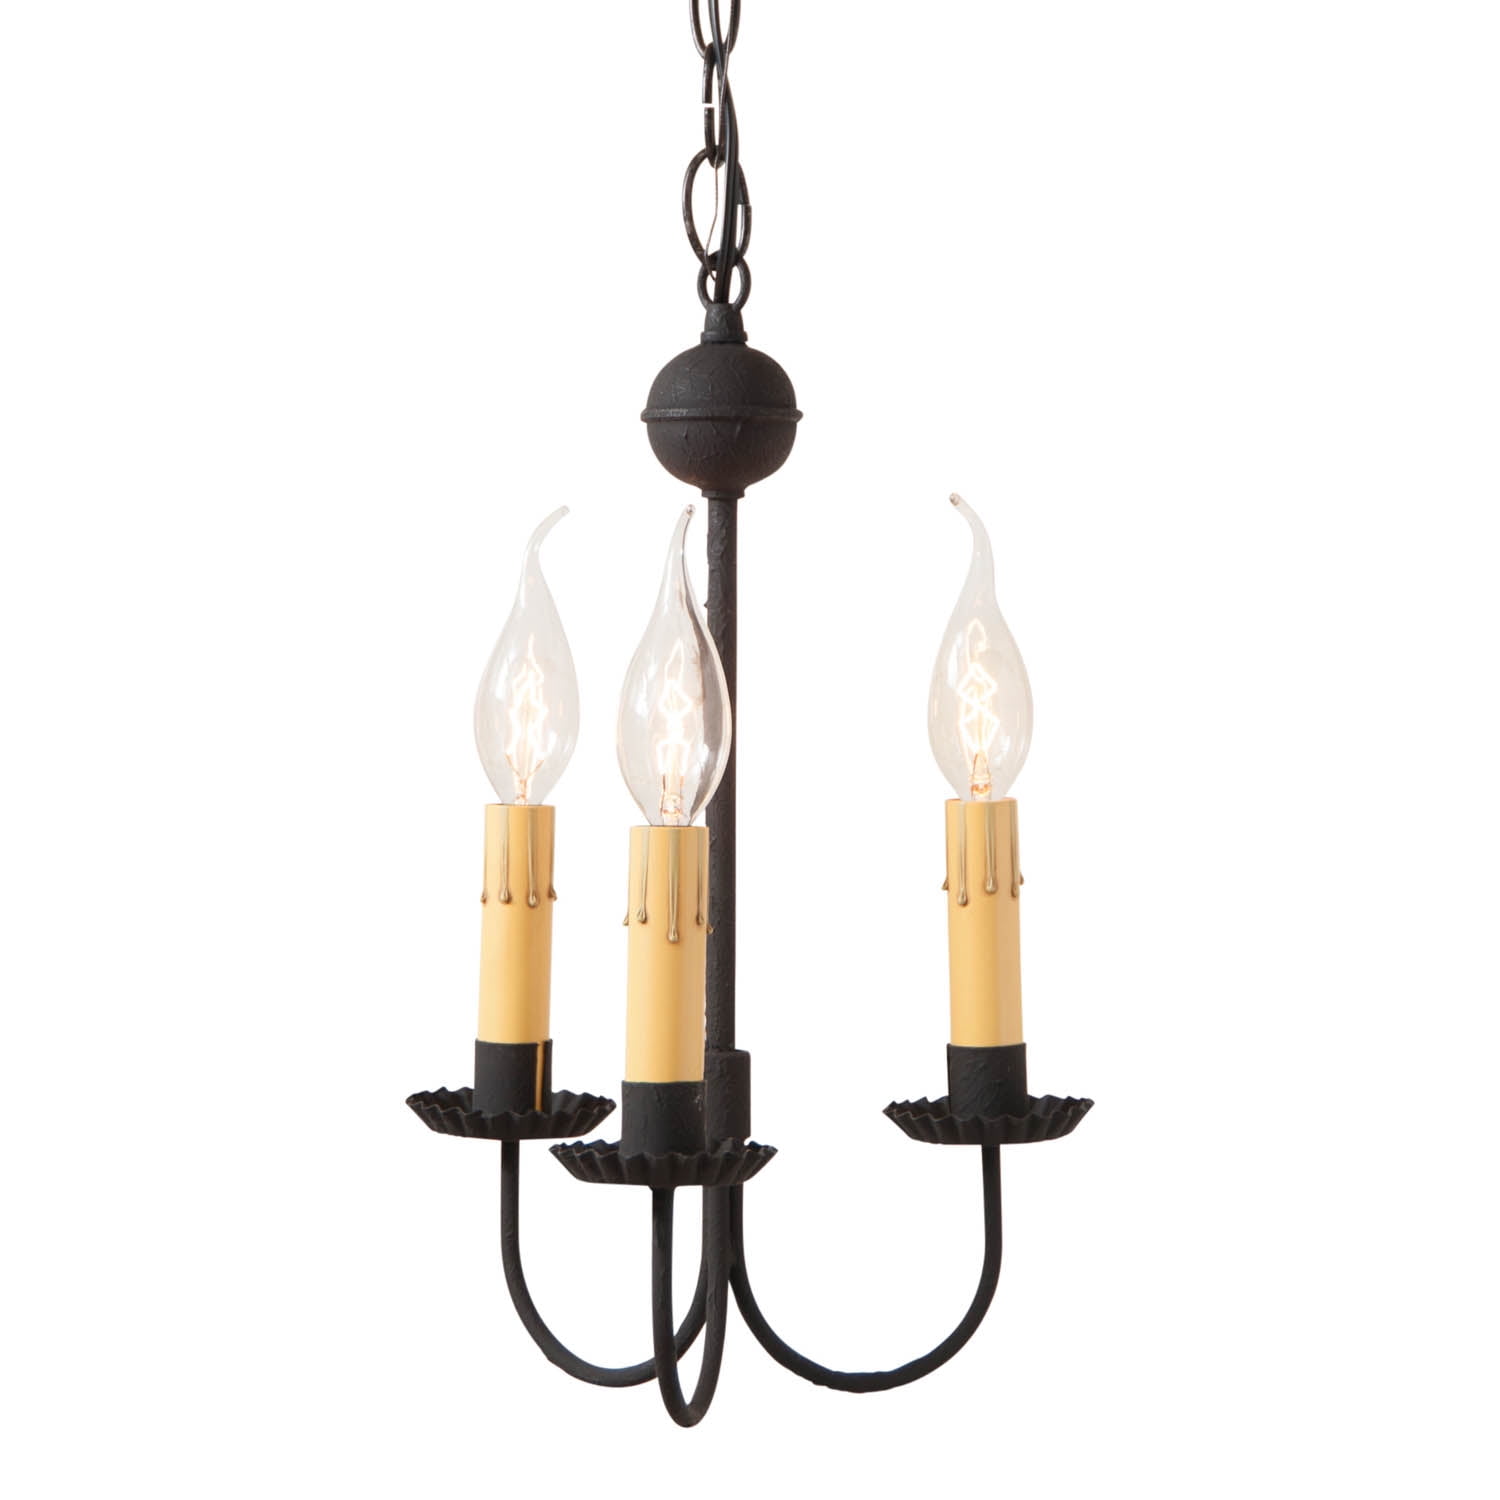 Small Georgetown Dining Room Country Farmhouse 4-arm Chandelier in Black 